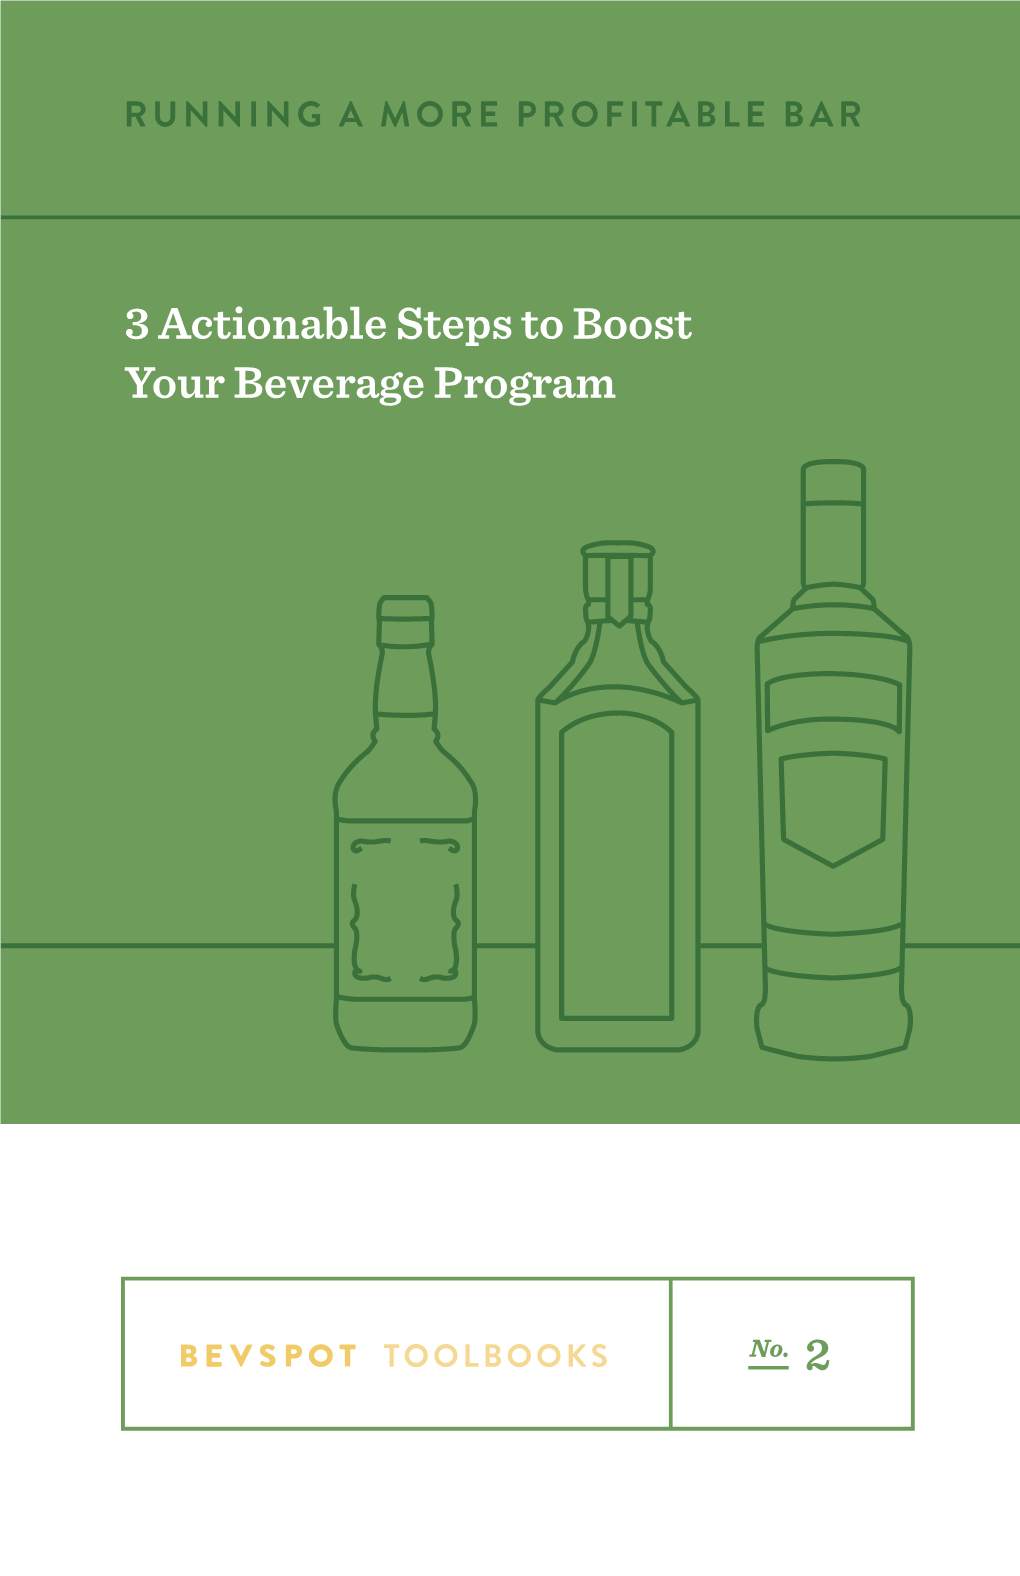 2 3 Actionable Steps to Boost Your Beverage Program